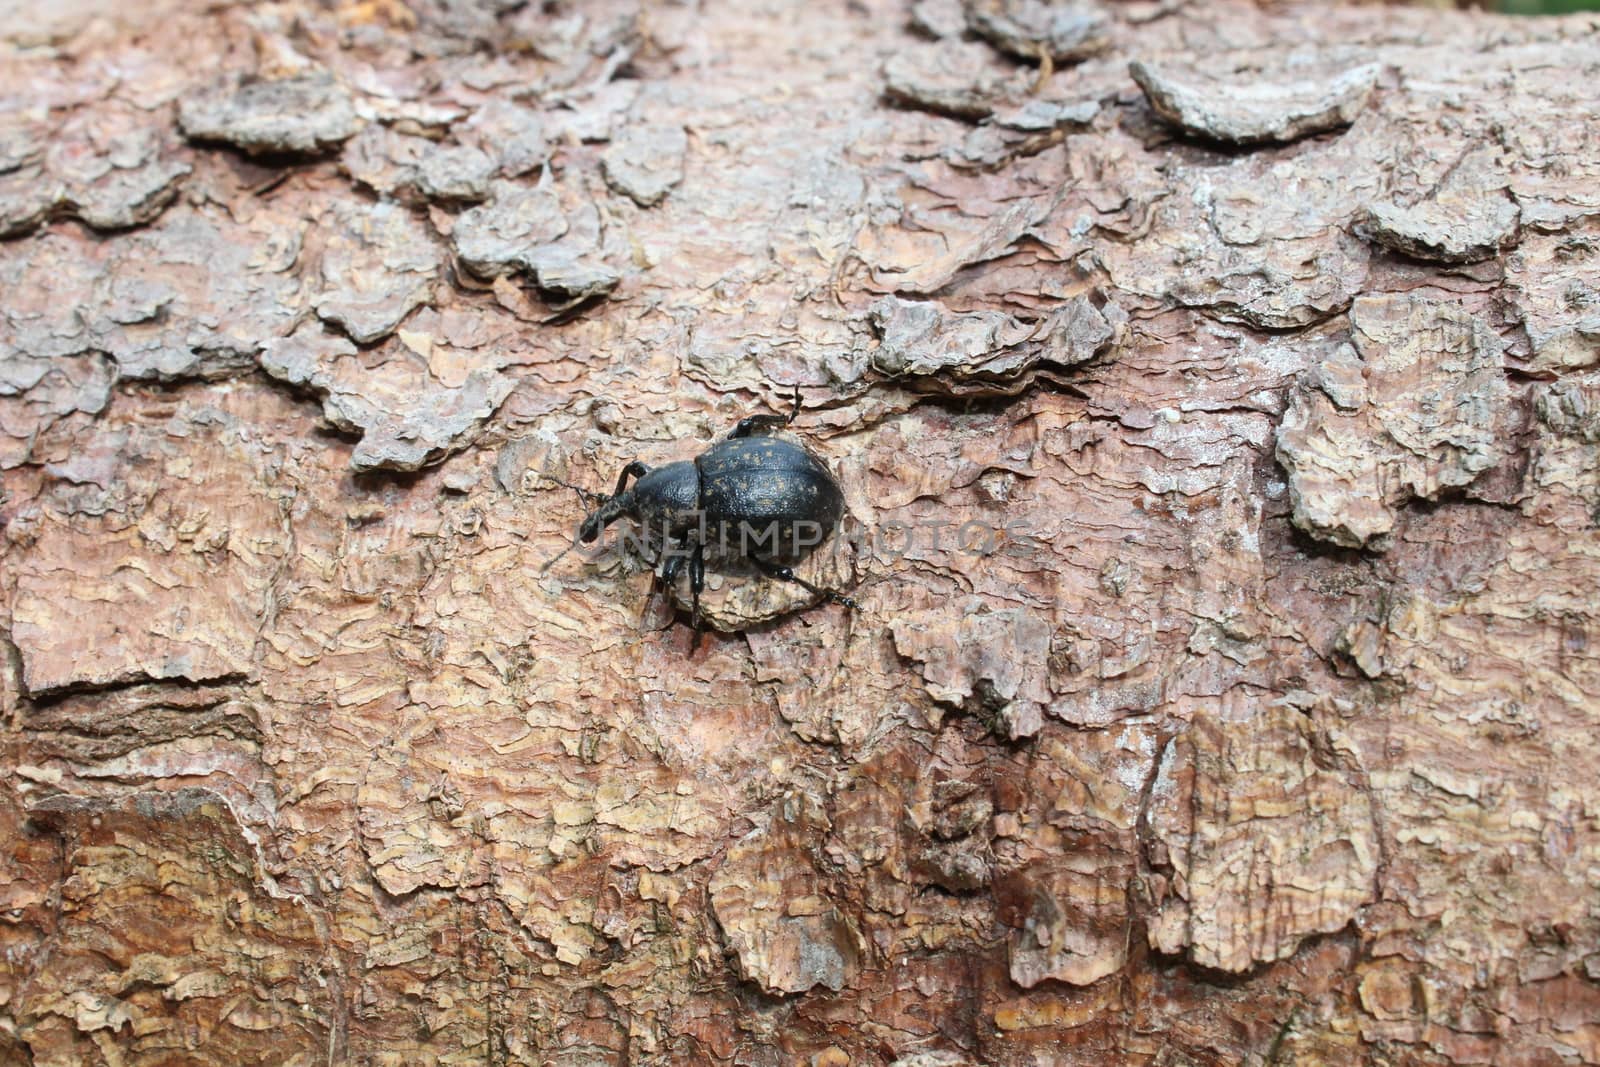 weevil on a bark in the forest by martina_unbehauen